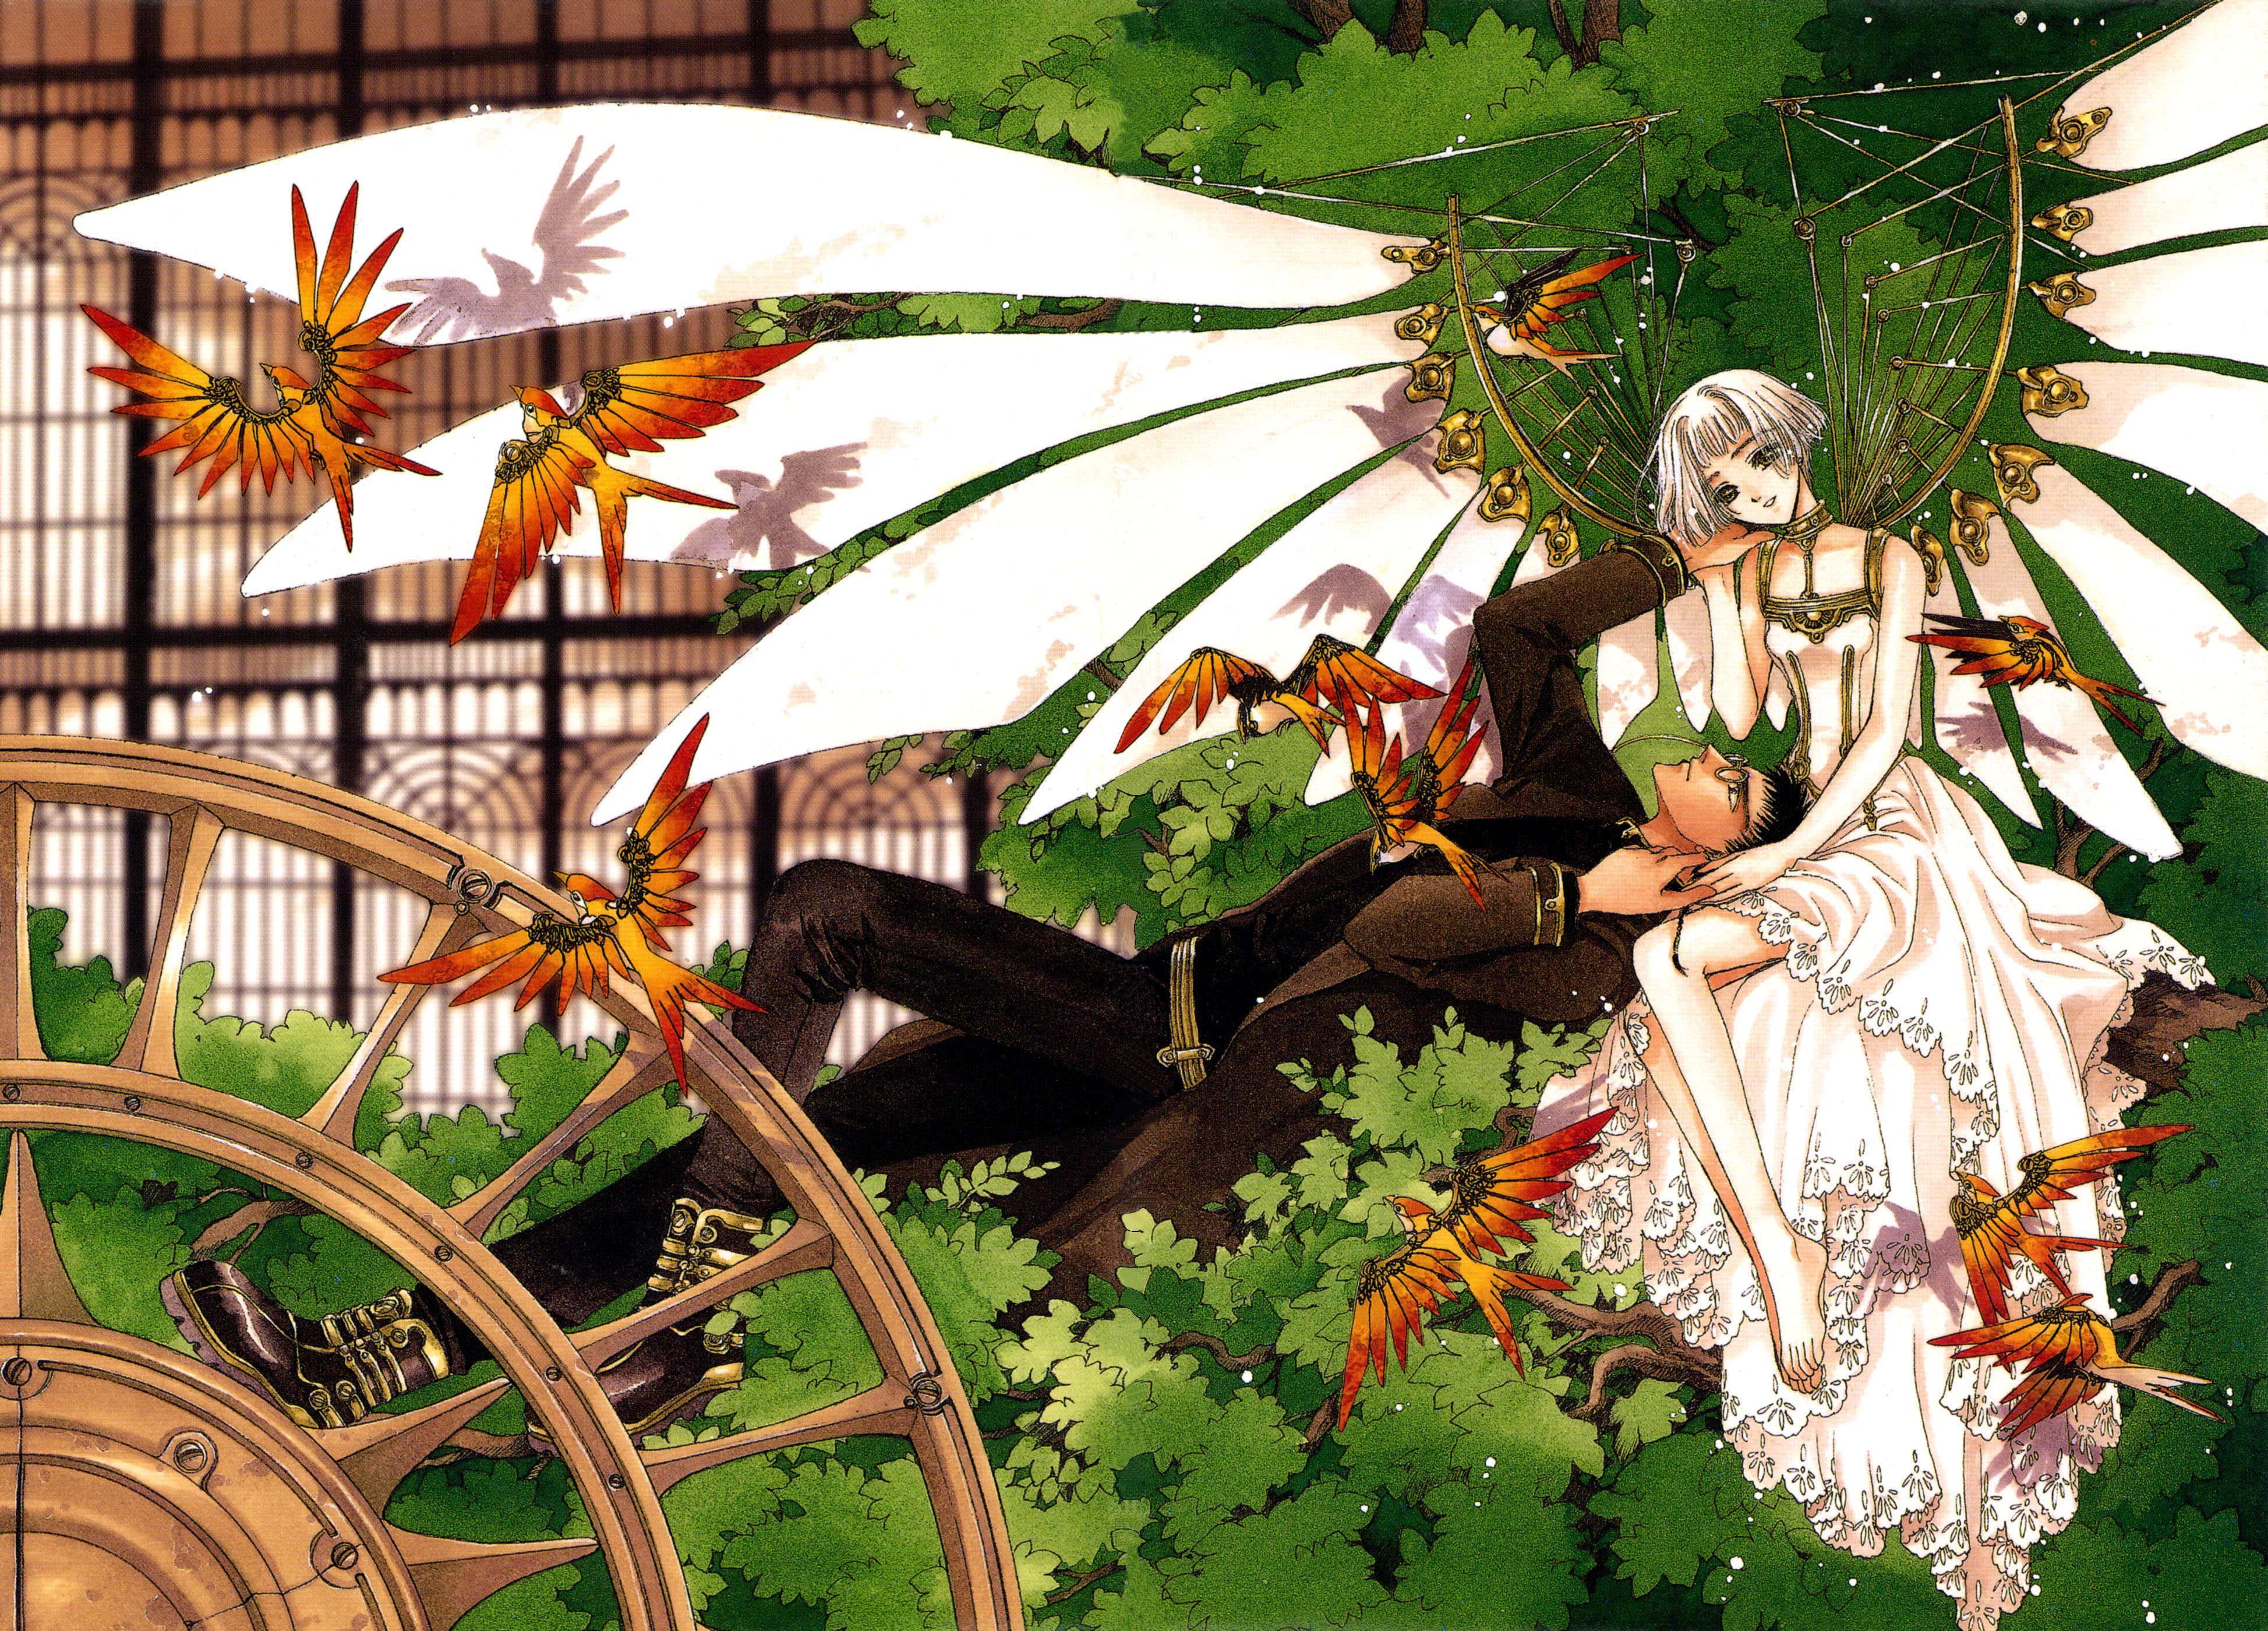 Suu And Kazuhiko Relax In A Garden Setting In Clover Illustration By Clamp